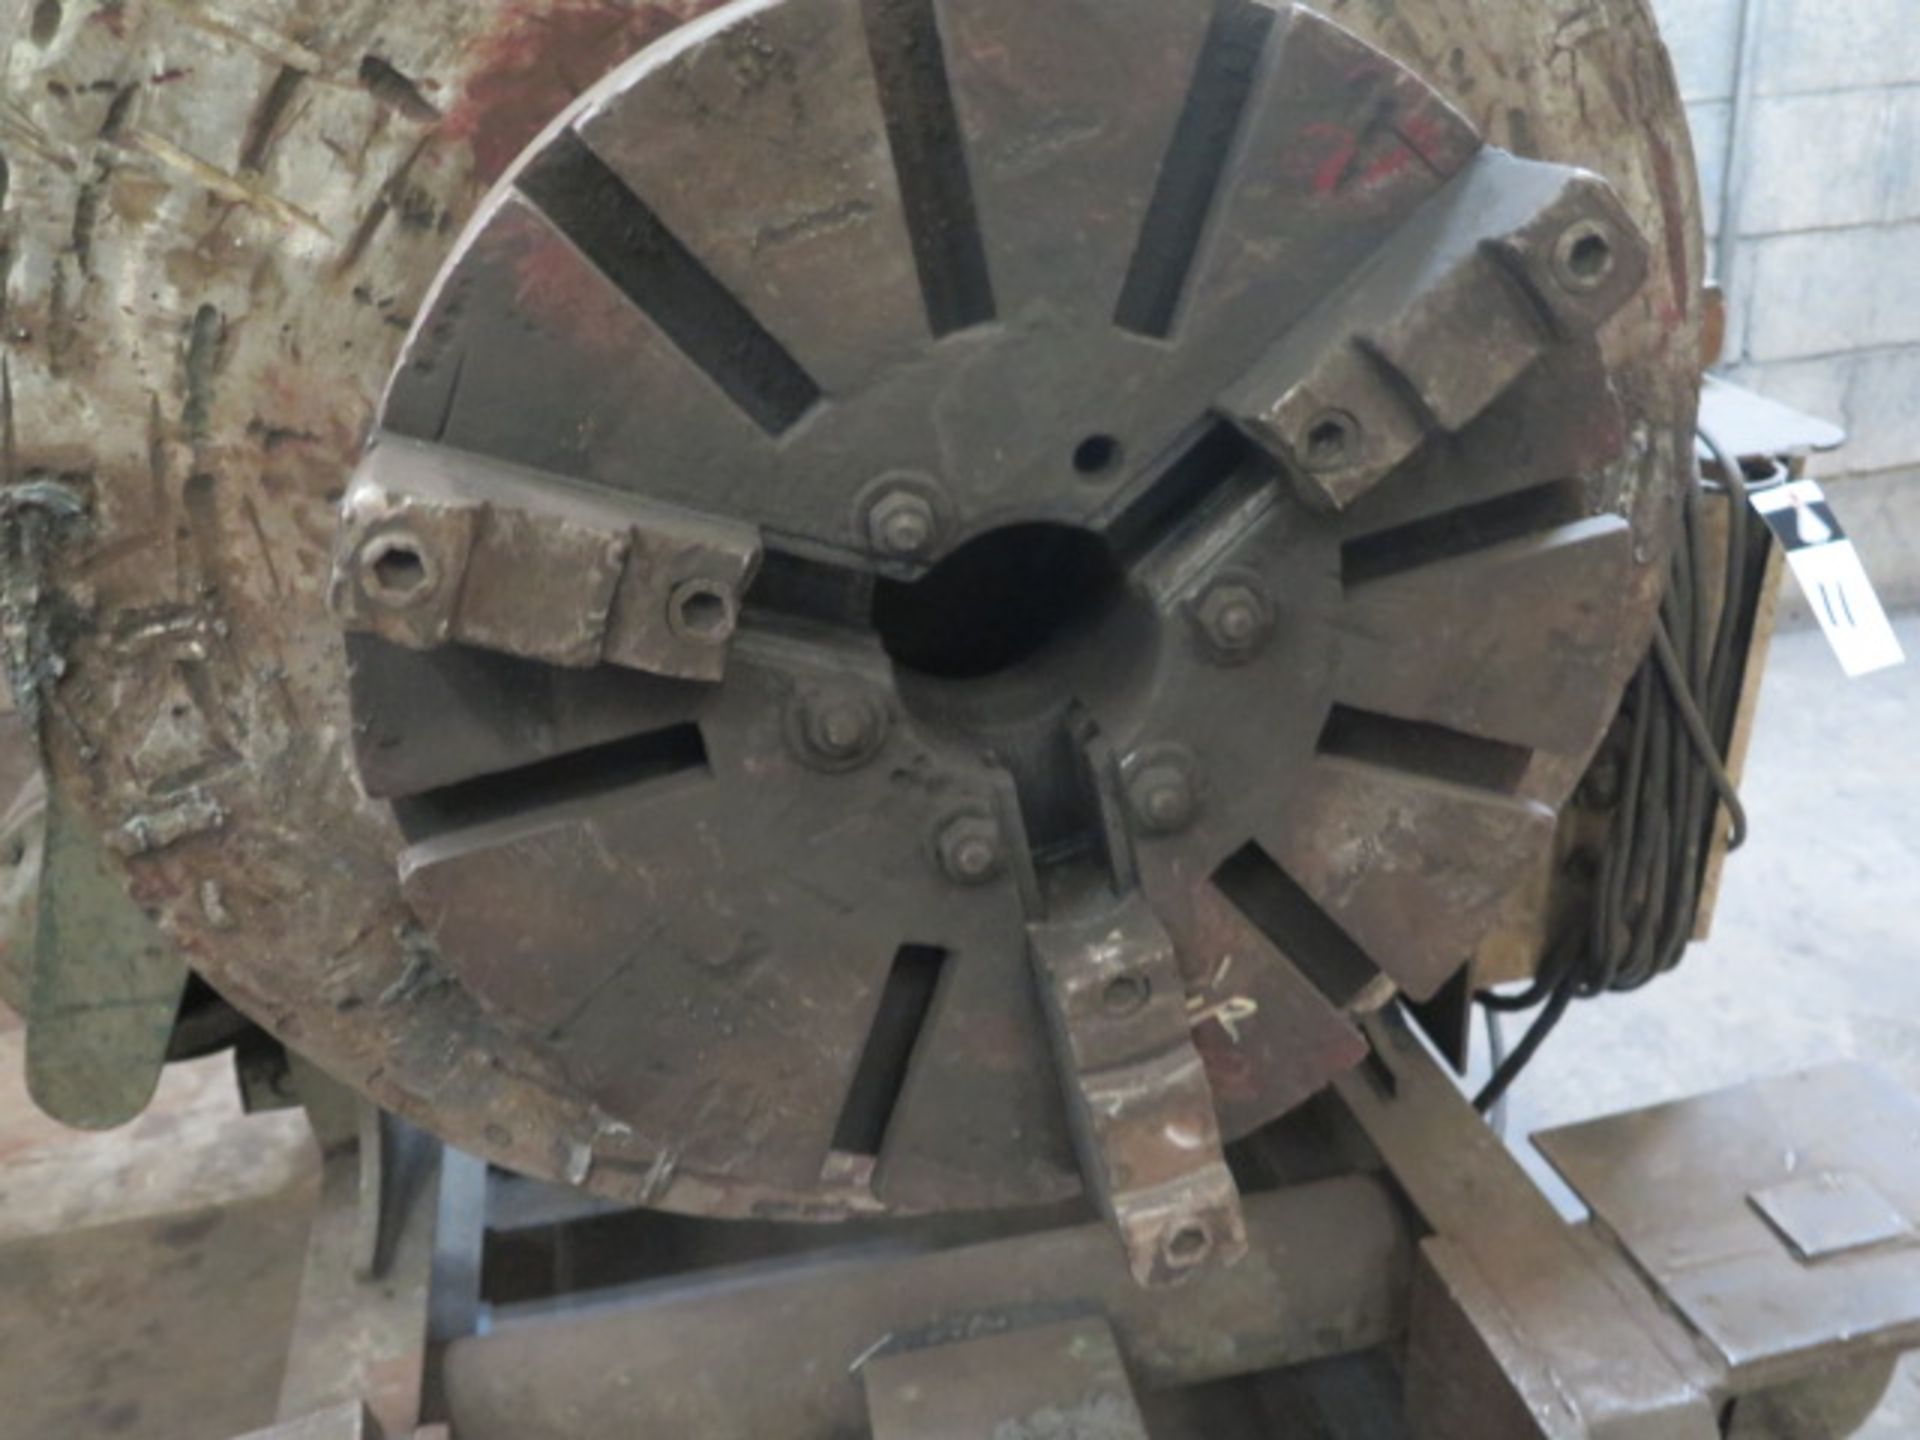 Reed P-25-R 2500 Lb Cap Welding Positioner w/ 33” Dia. Table, 18” 3-Jaw Chuck - Image 4 of 6